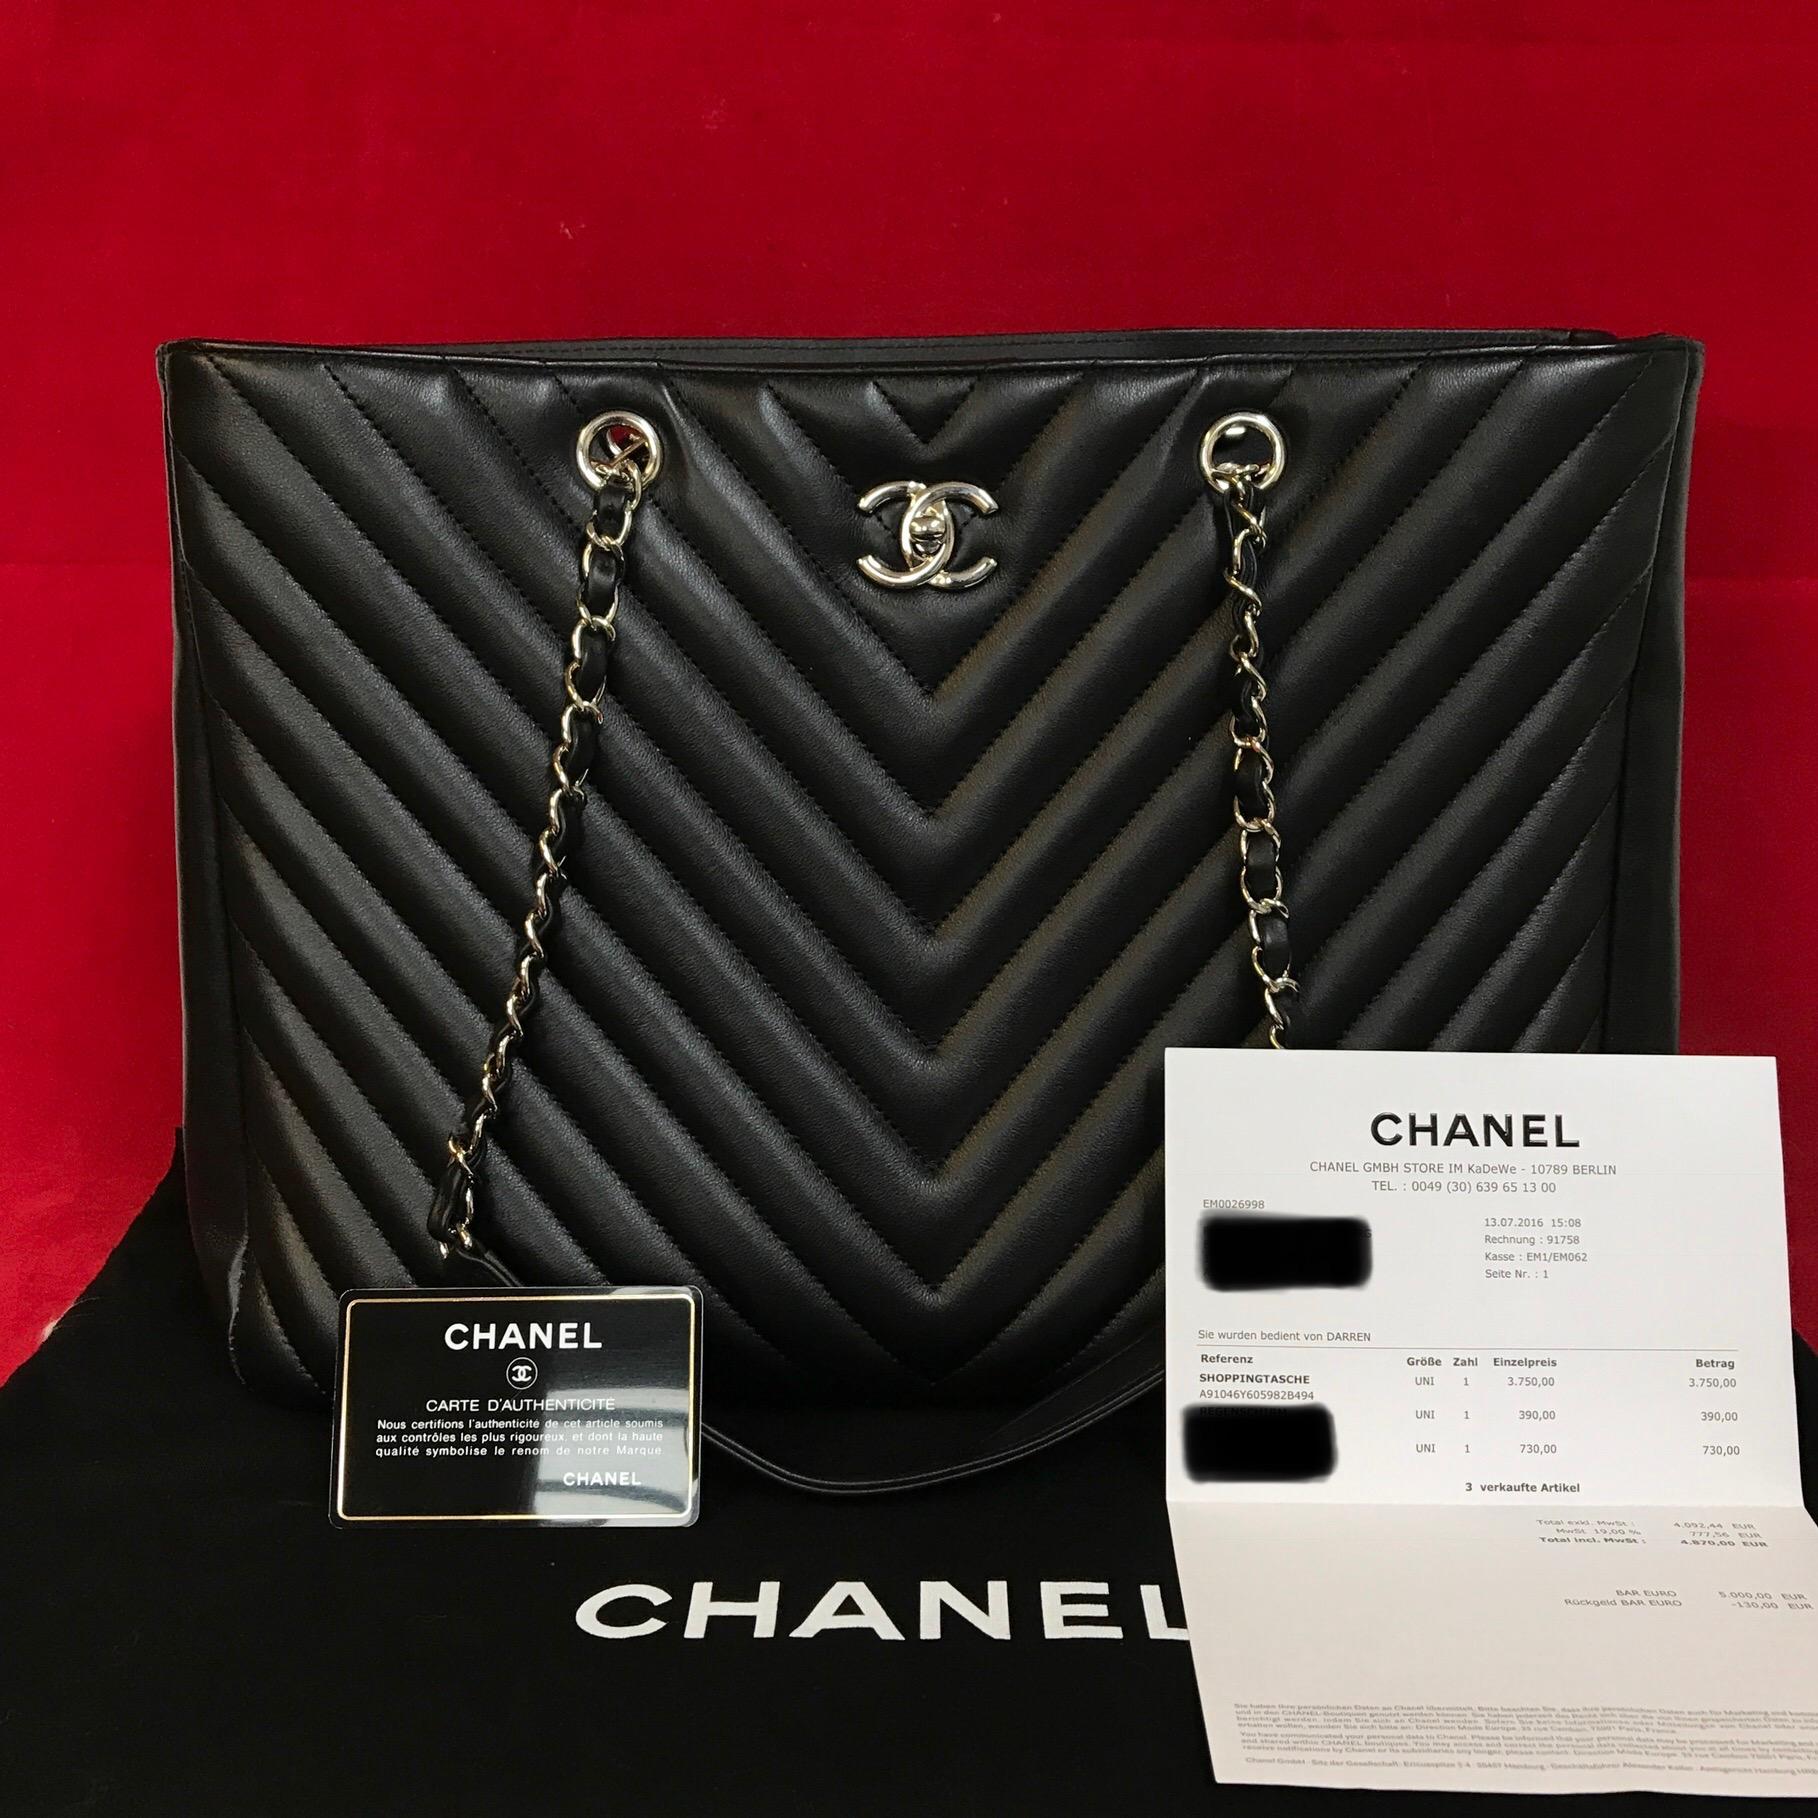 Large CHANEL chevron lambskin shopping bag in black.

The bag is in a very good condition and has minimal signs of use.

The delivery includes:
- Chanel Shopper
- Dustbag
- Warranty card
- Original CHANEL bill of 2016

Dimensions:
15 x 10,5 x 6